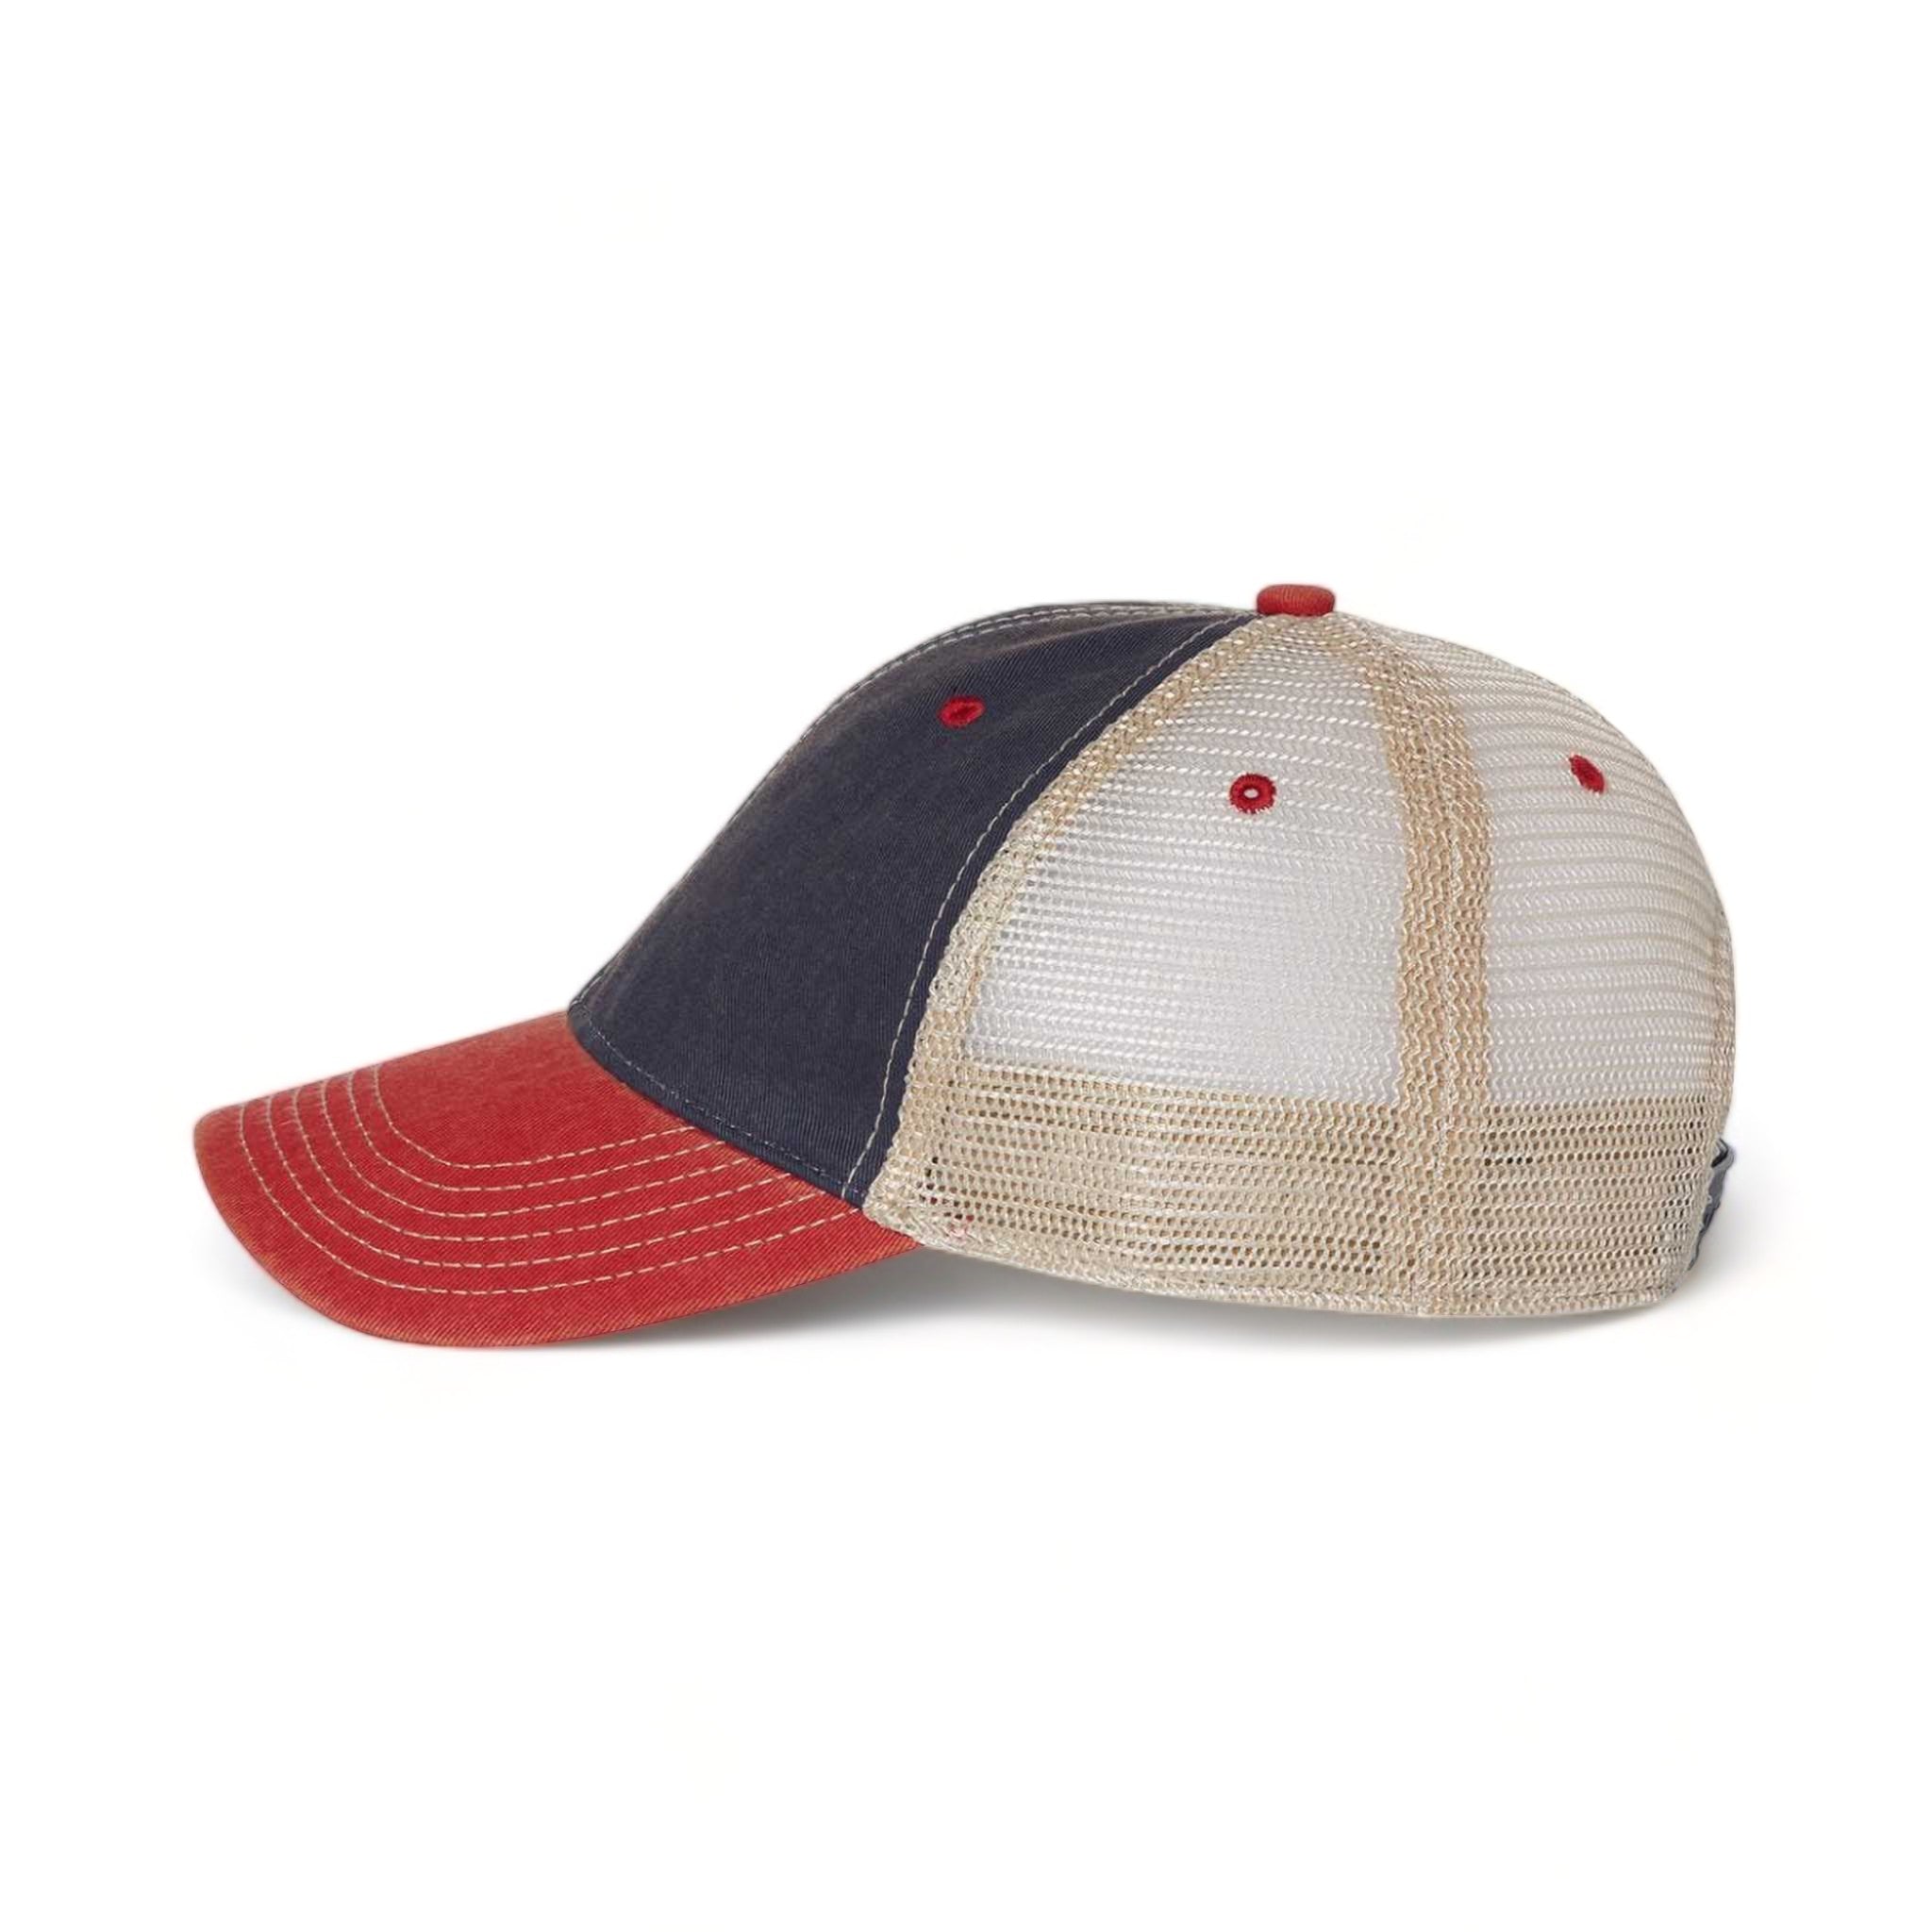 Side view of LEGACY OFA custom hat in navy, scarlet red and khaki